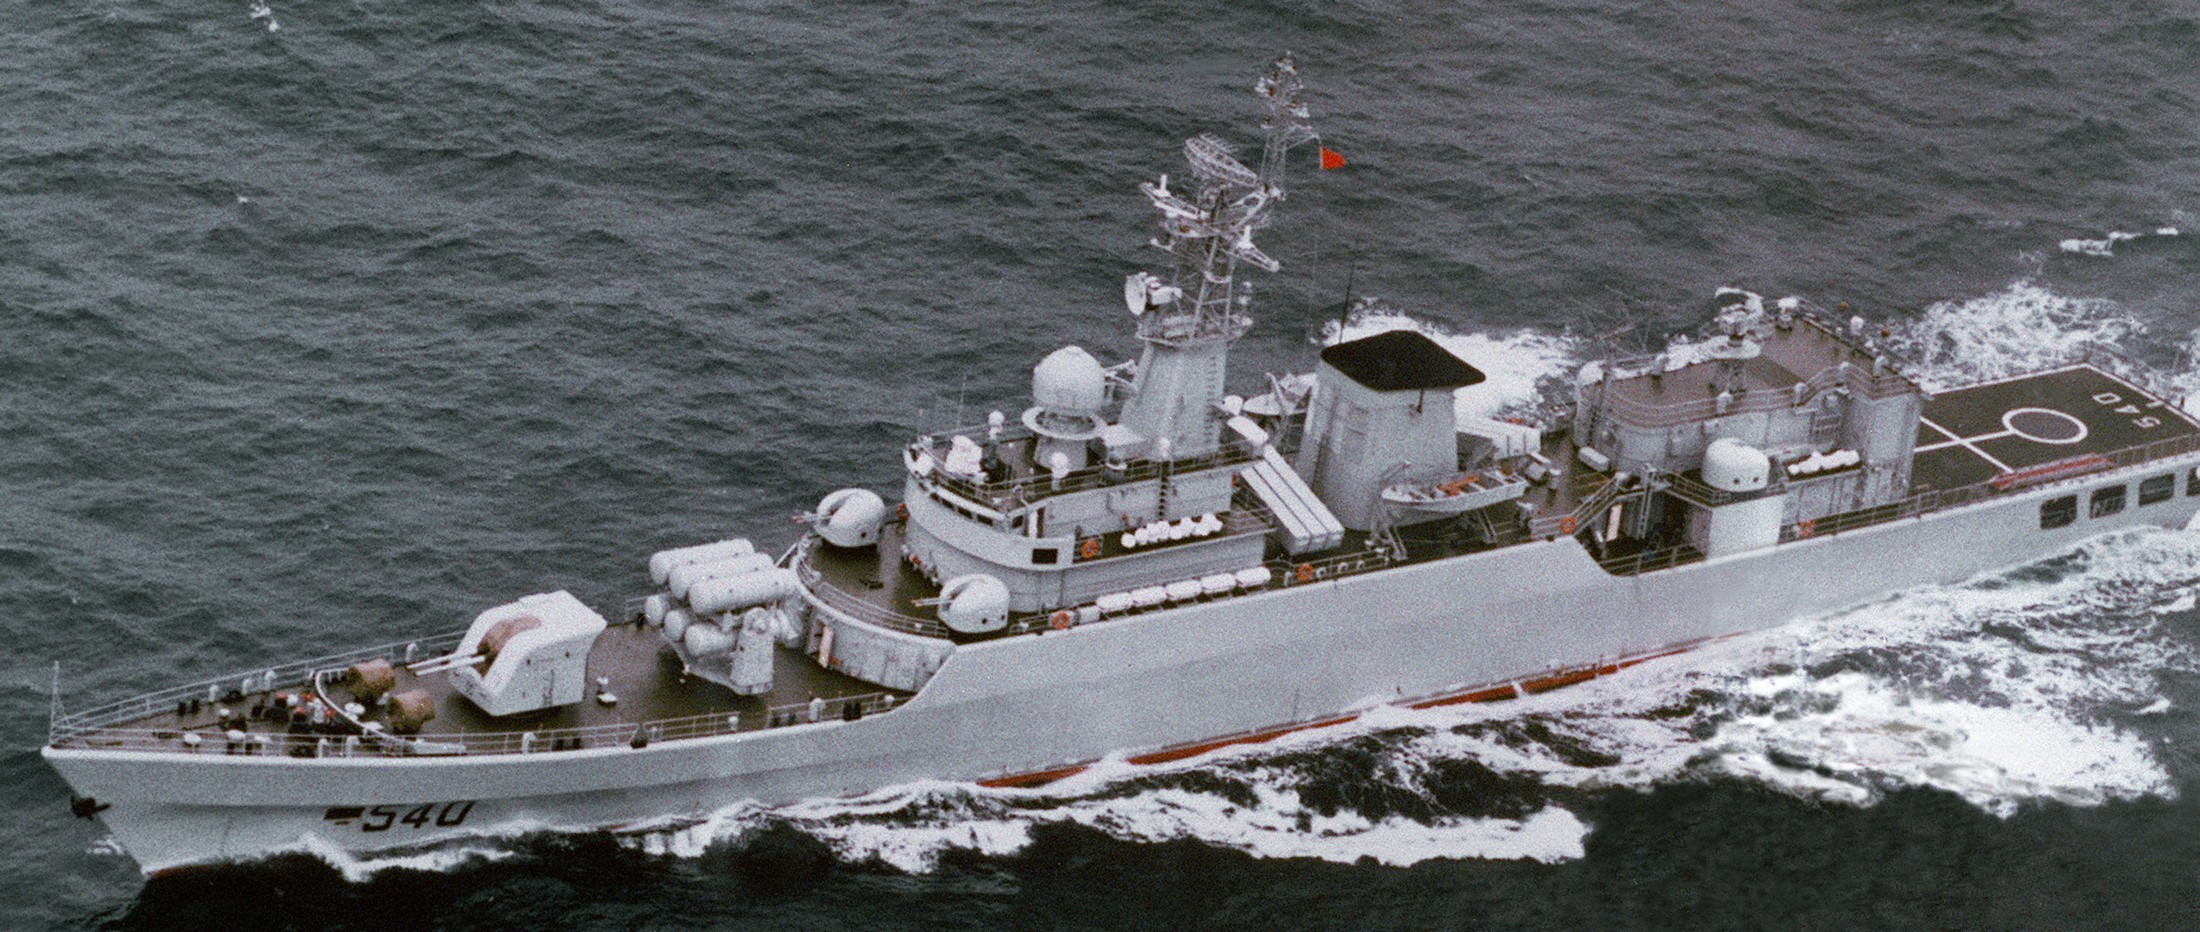 type 053h2g jiangwei i class frigate china people's liberation army navy plan yj-8 ssm missile hq-61 sam 02x